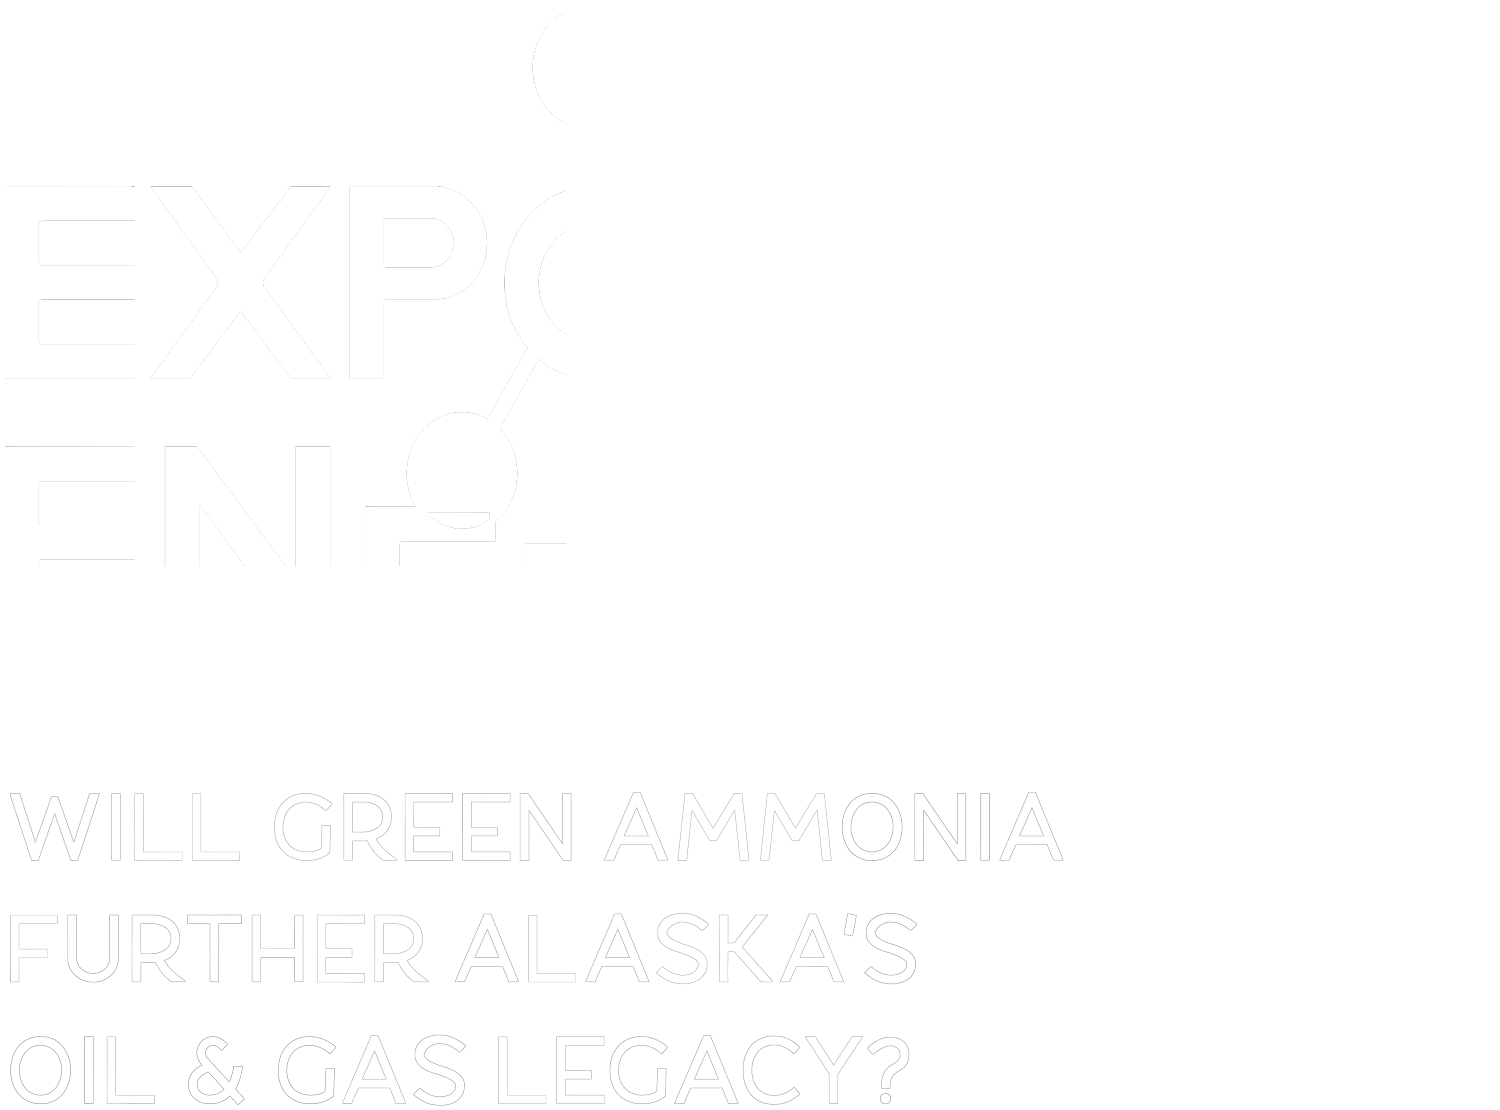 Exporting Energy: Will Green Ammonia Further Alaska's Oil & Gas Legacy? text